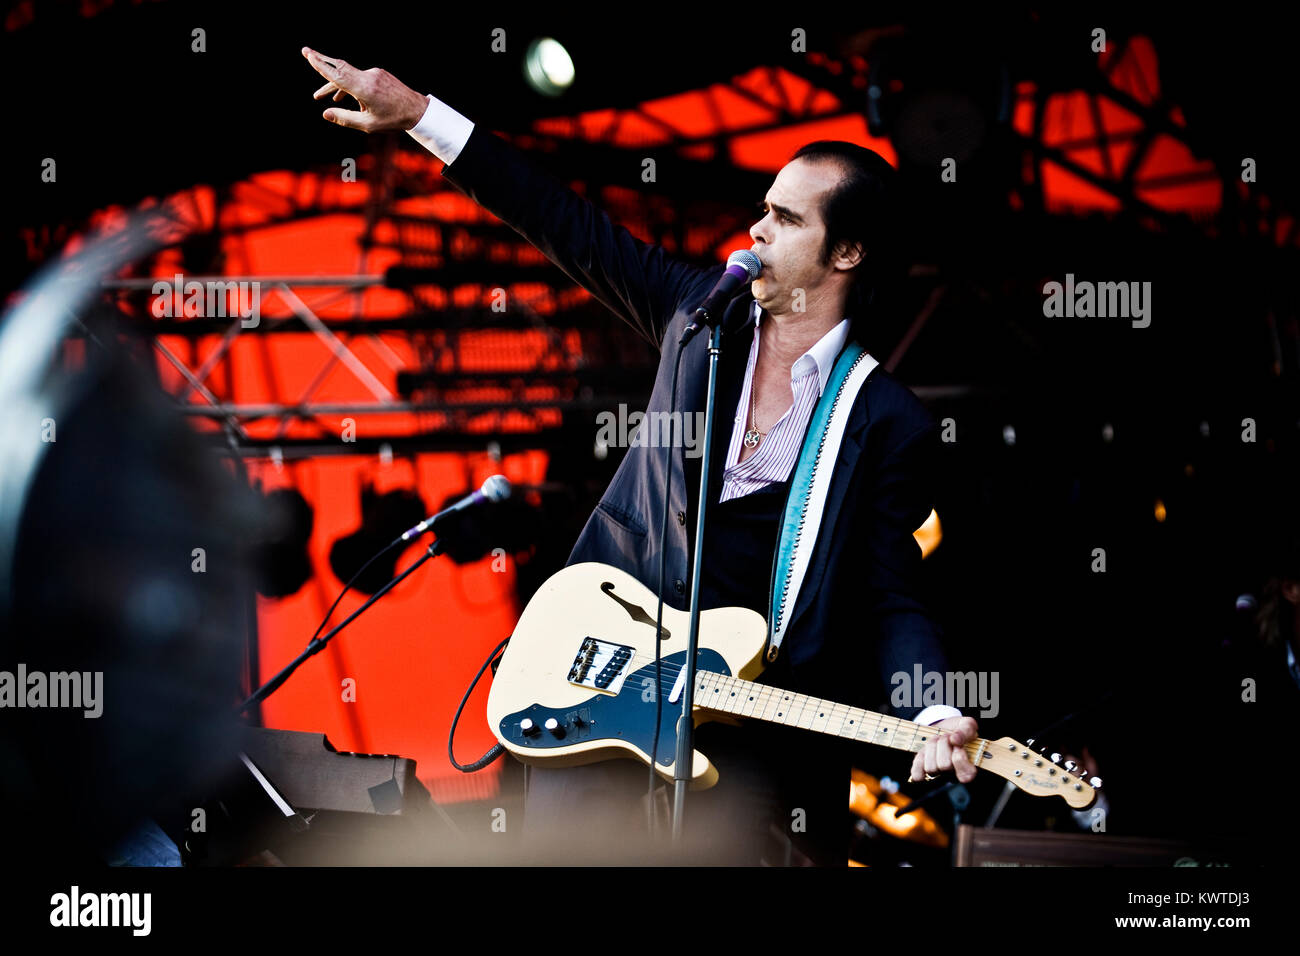 The Australian musician, composer, author and singer Nick Cave is here pictured at a live concert with his band The Bad Seeds at Roskilde Festival 2009. Denmark 03/07 2009. Stock Photo